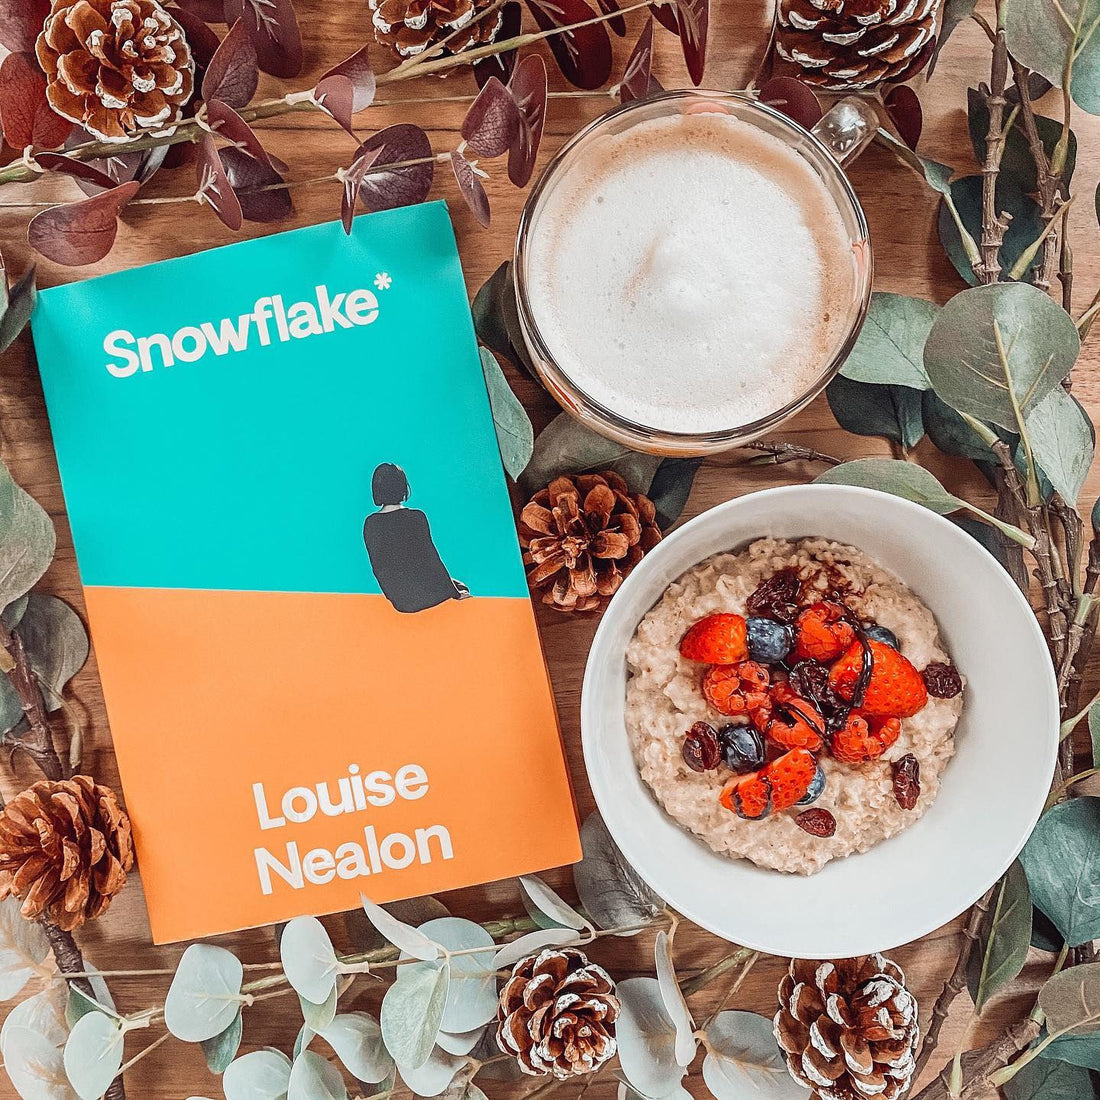 Book Review: Snowflake by Louise Nealon